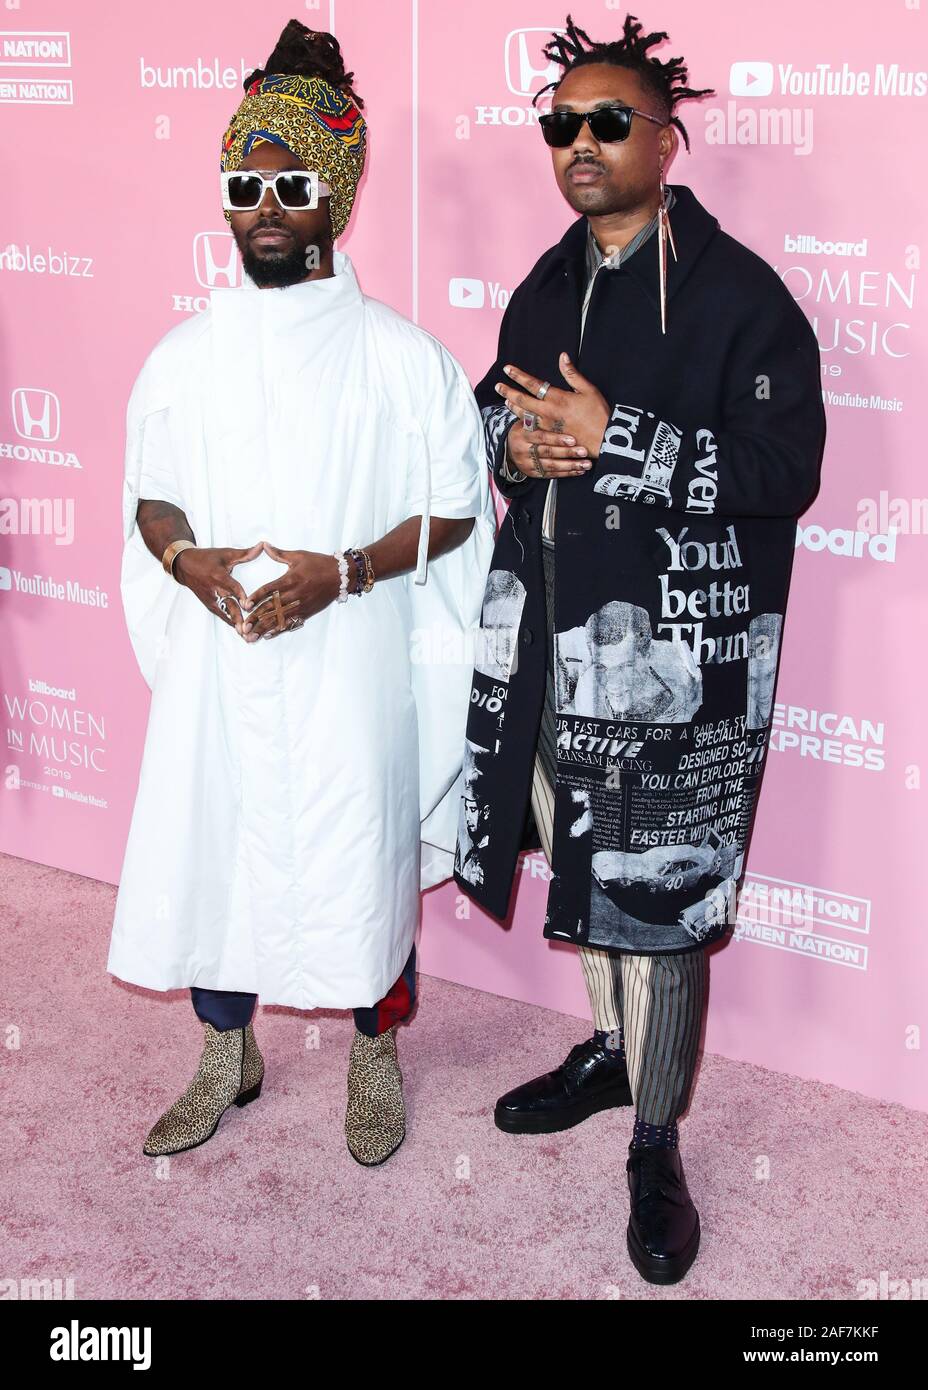 HOLLYWOOD, LOS ANGELES, CALIFORNIA, USA - DECEMBER 12: Johnny Venus and  Doctur Dot of EarthGang arrive at the 2019 Billboard Women In Music  Presented By YouTube Music held at the Hollywood Palladium